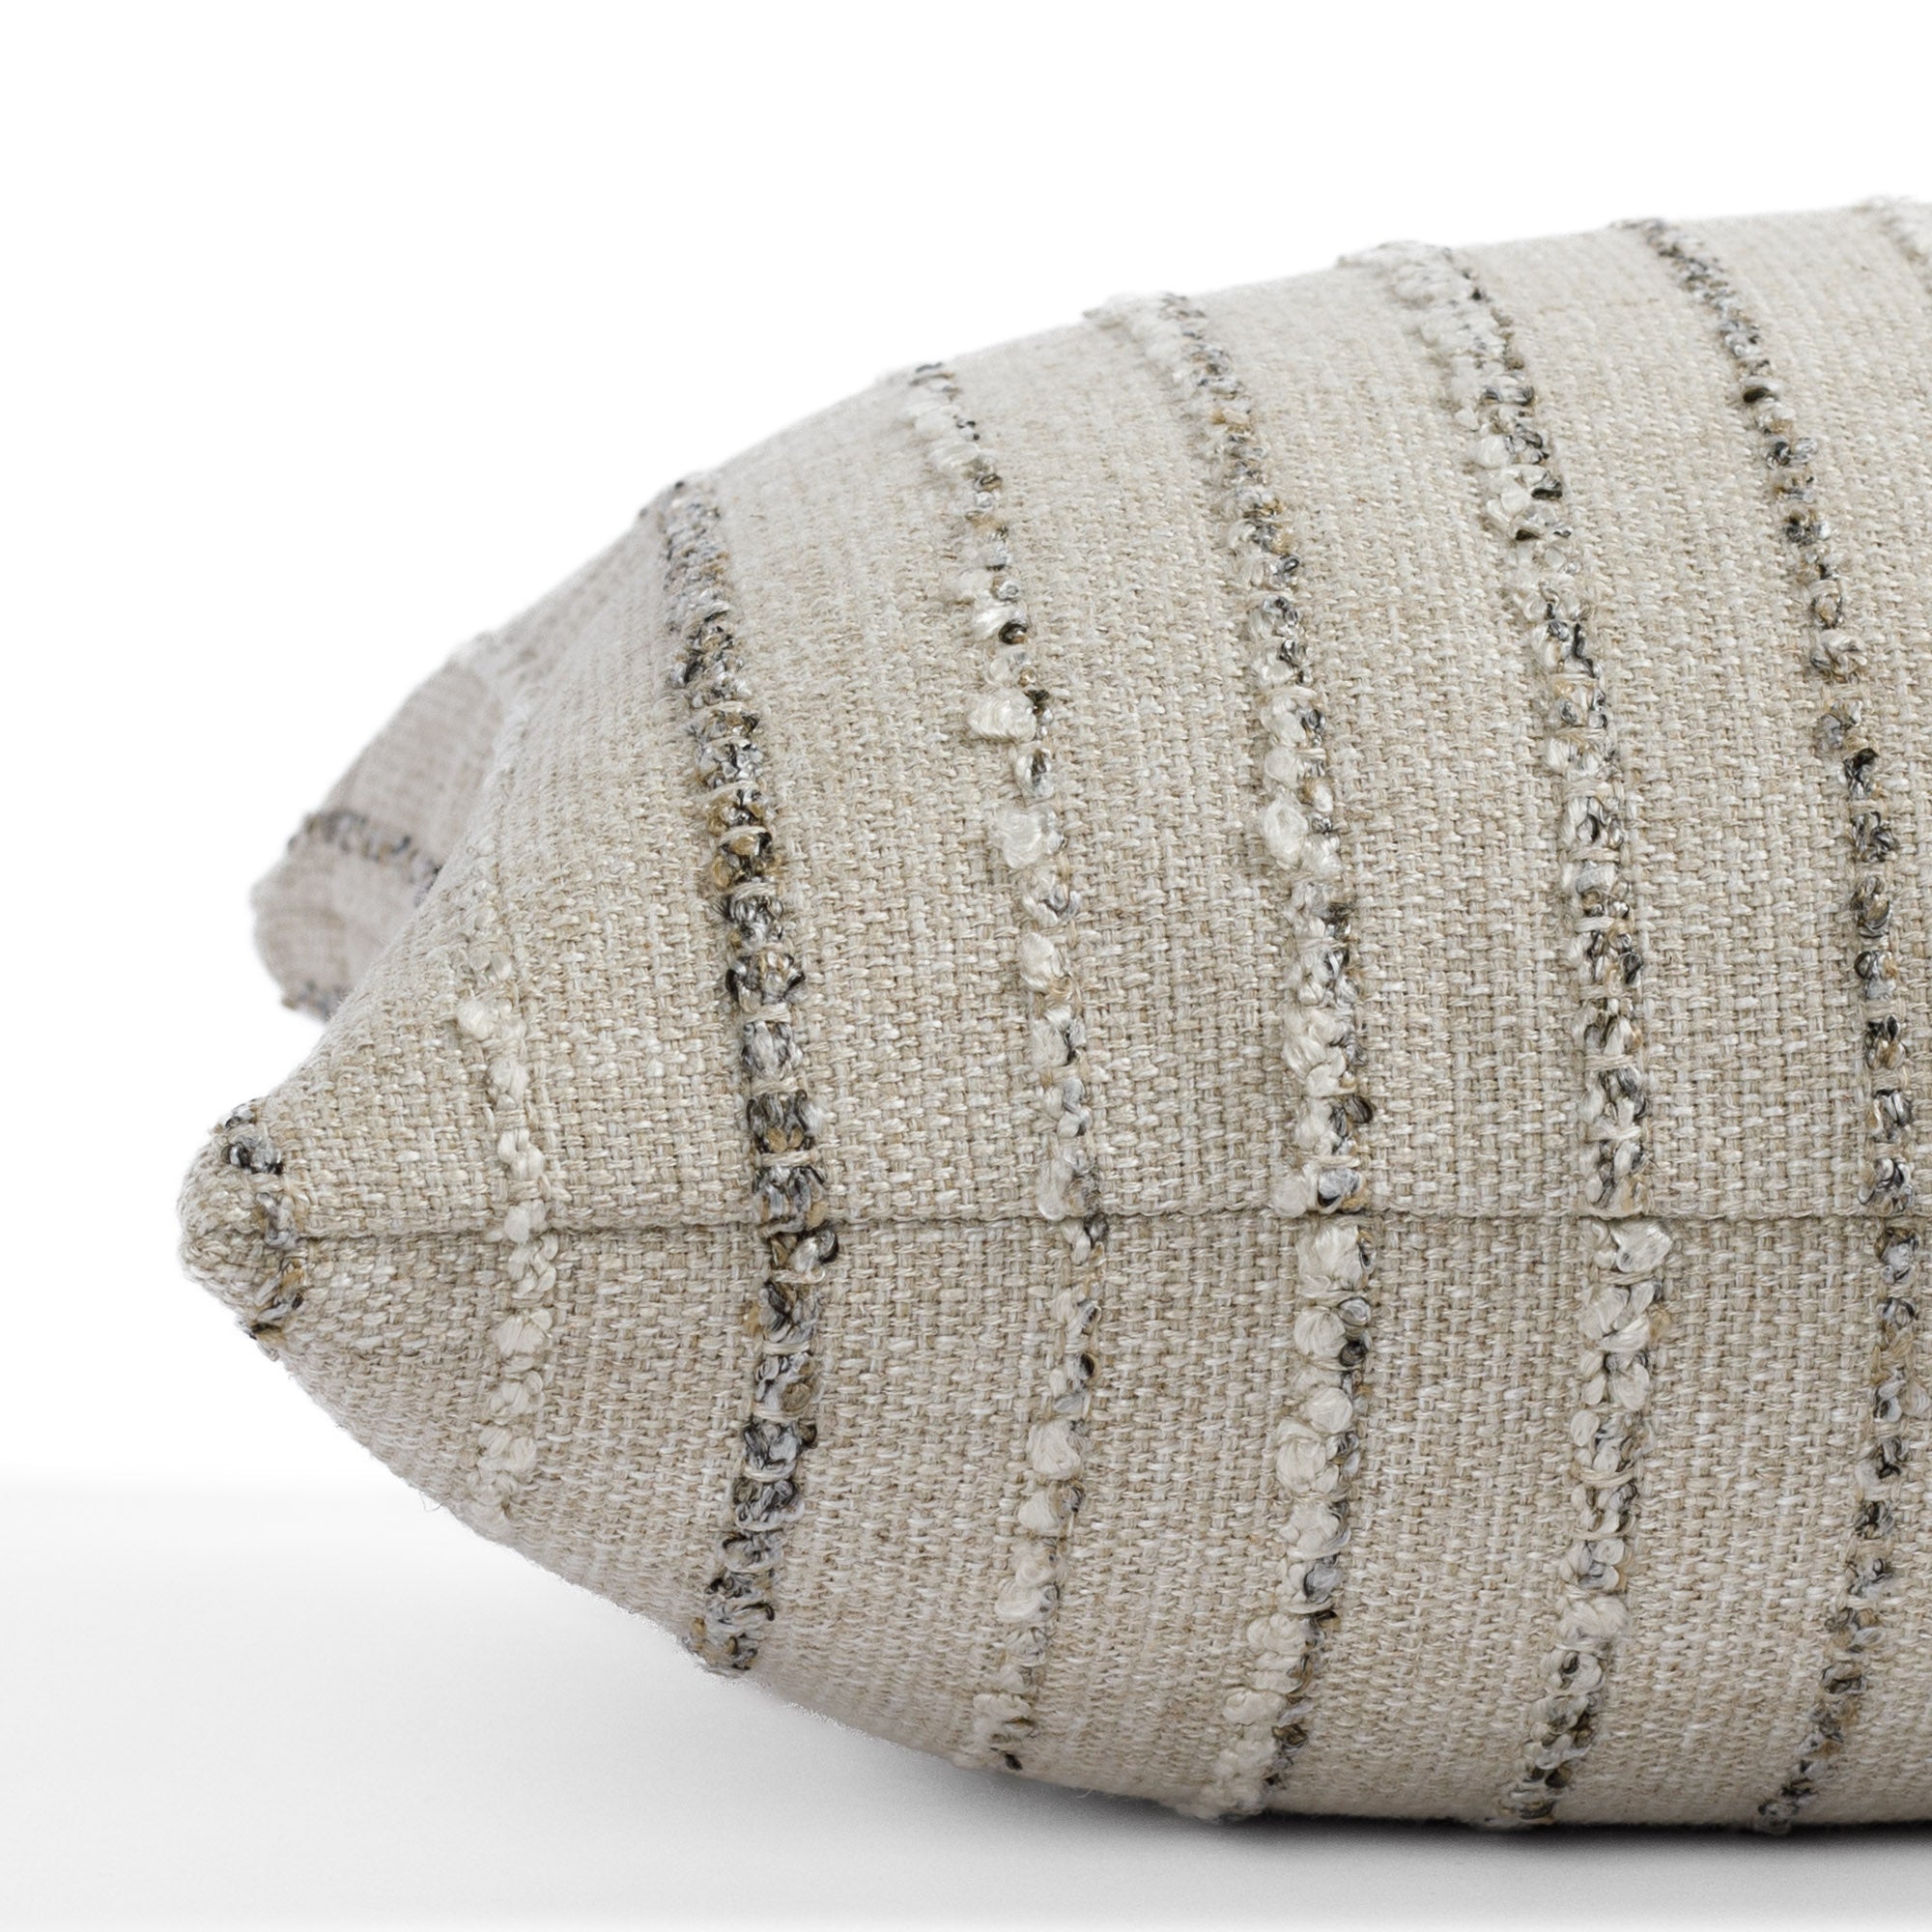 a neutral earth toned striped extra long lumbar pillow : close up side view